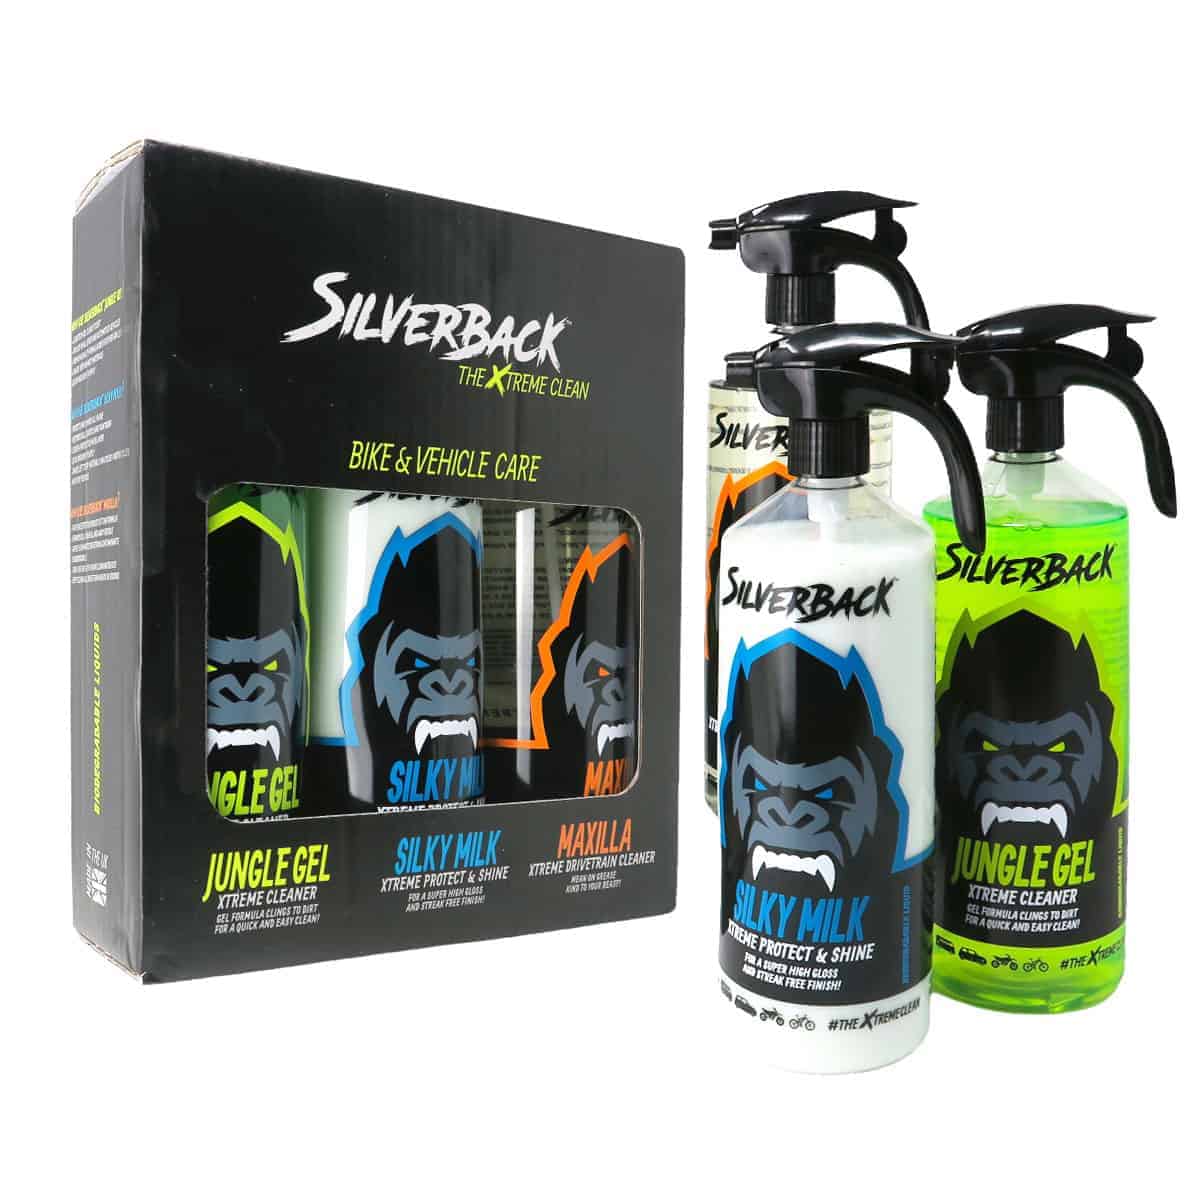 Silverback Motorcycle Cleaning Gift Box: The 3 essential treatments for your motorcycle & dirtbike to come up clean, fast 2